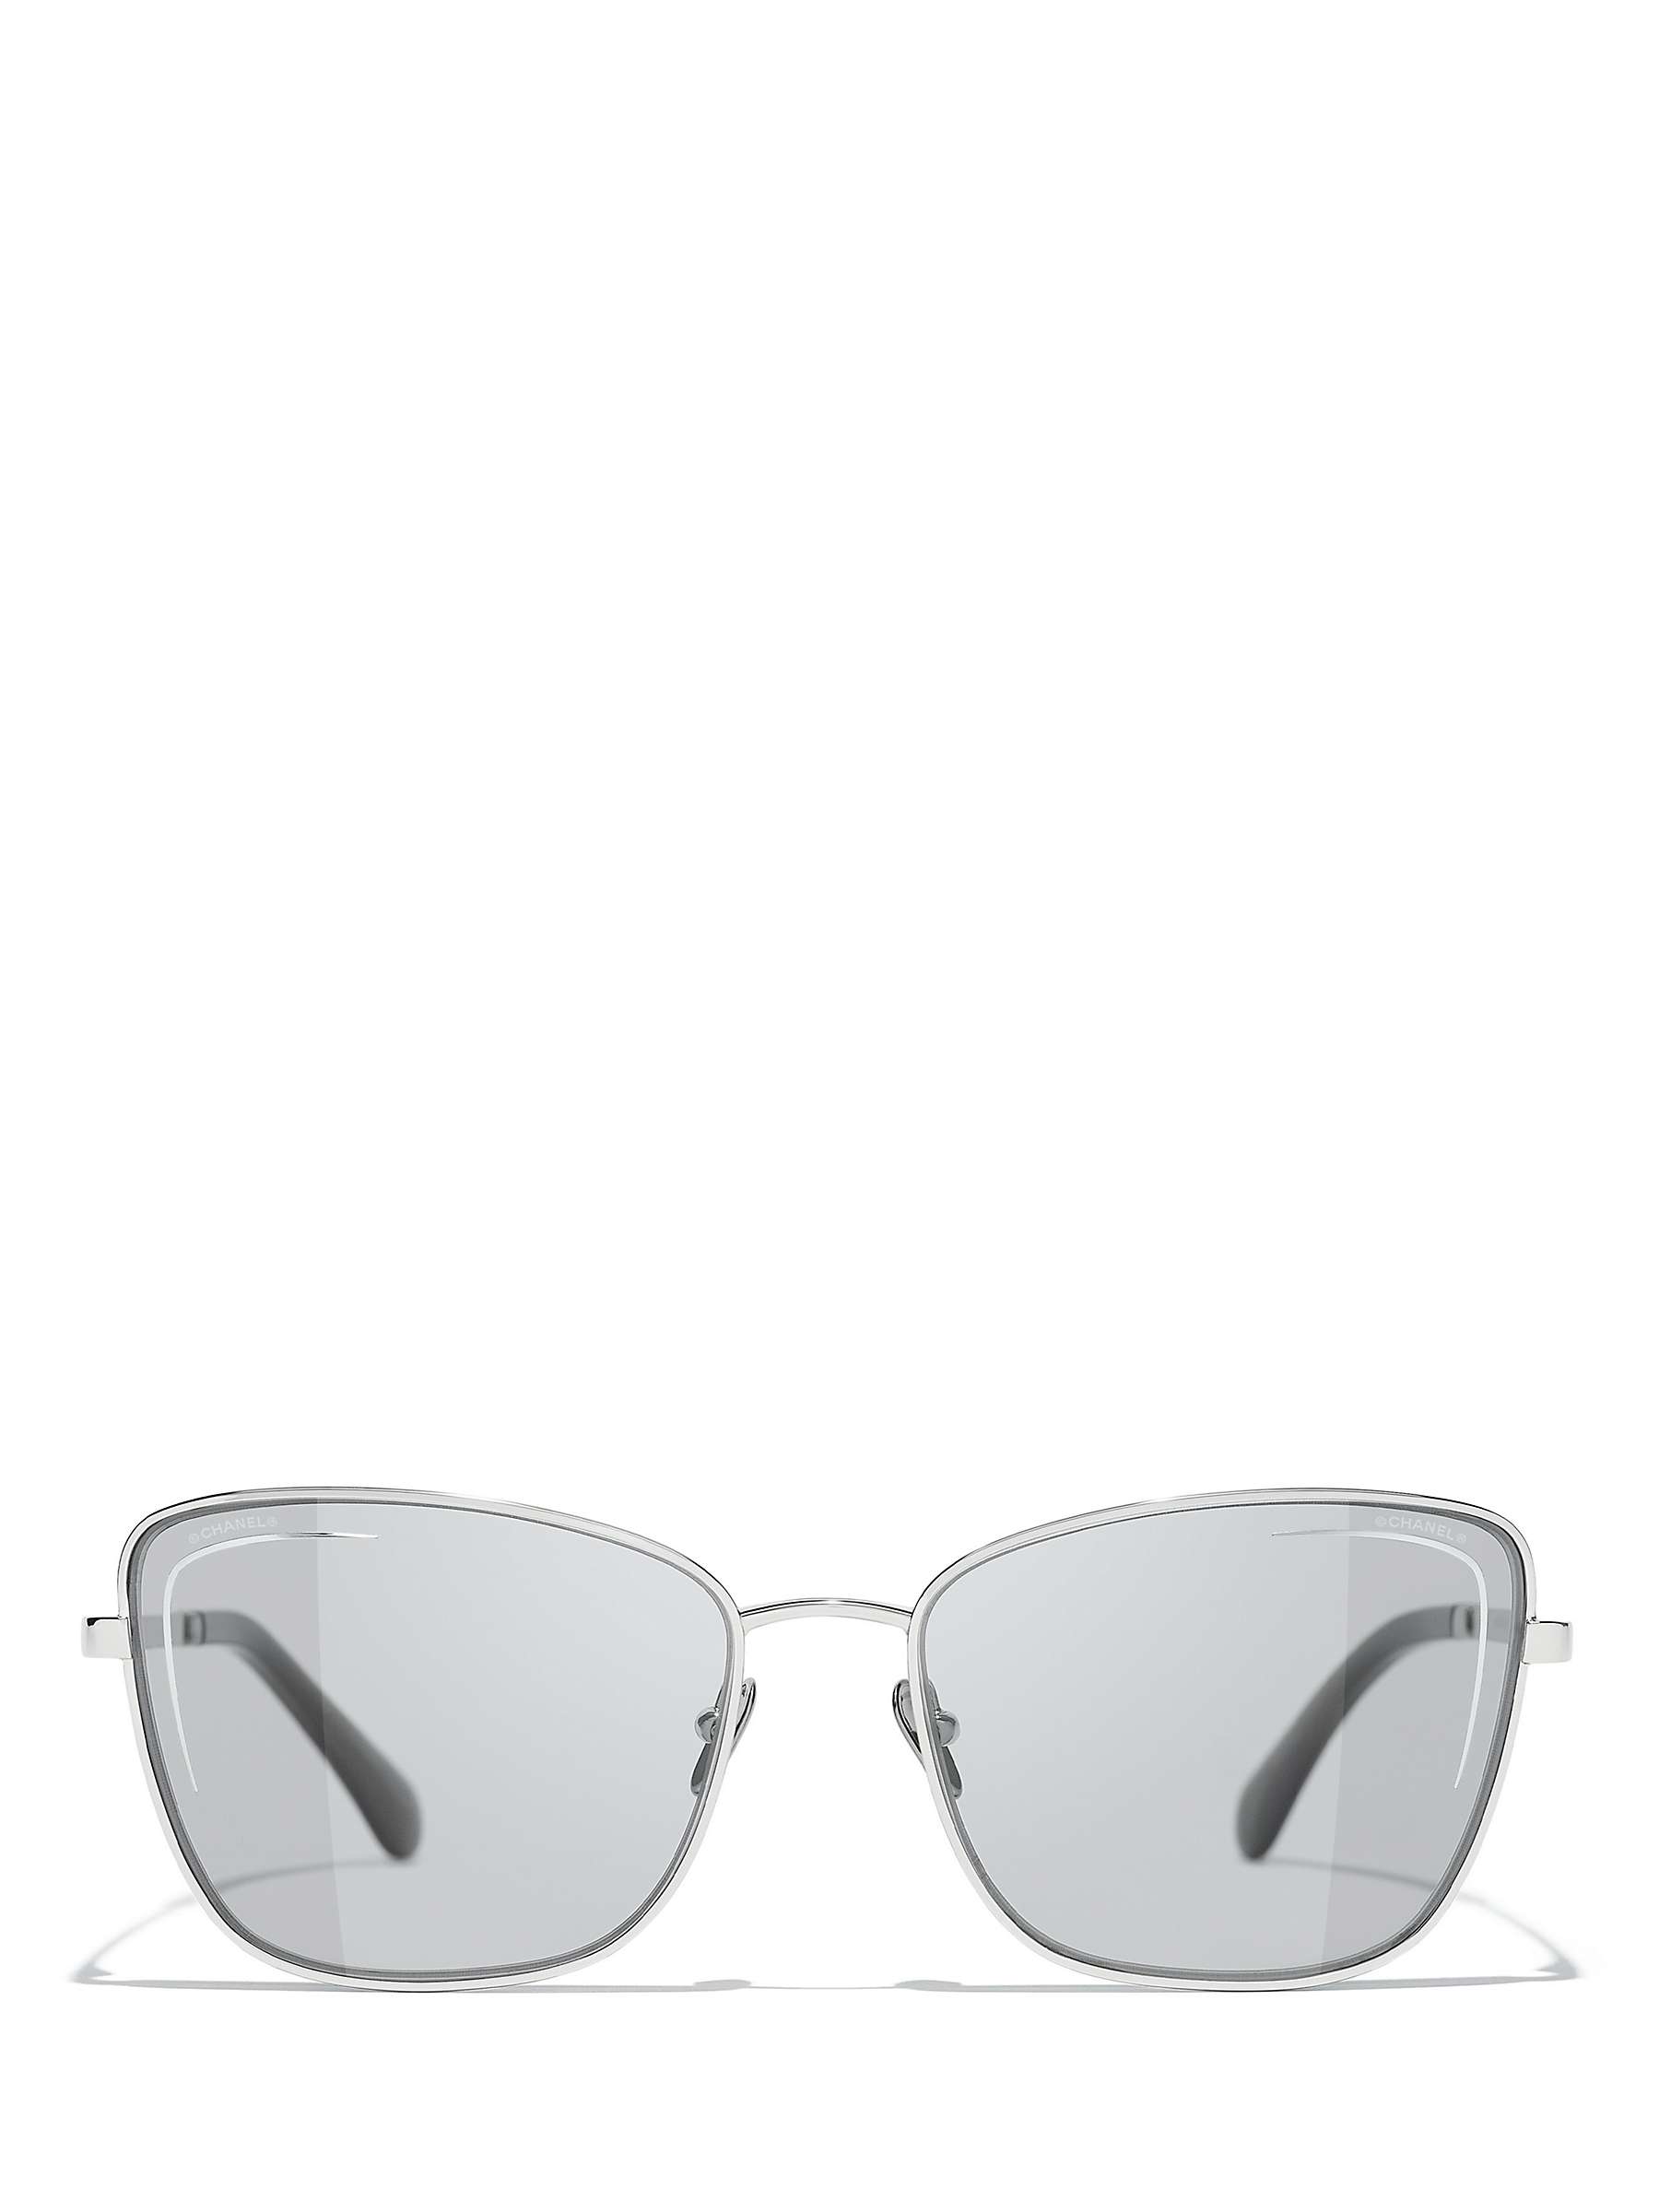 Buy CHANEL Rectangular Sunglasses CH4267 Silver/Grey Online at johnlewis.com